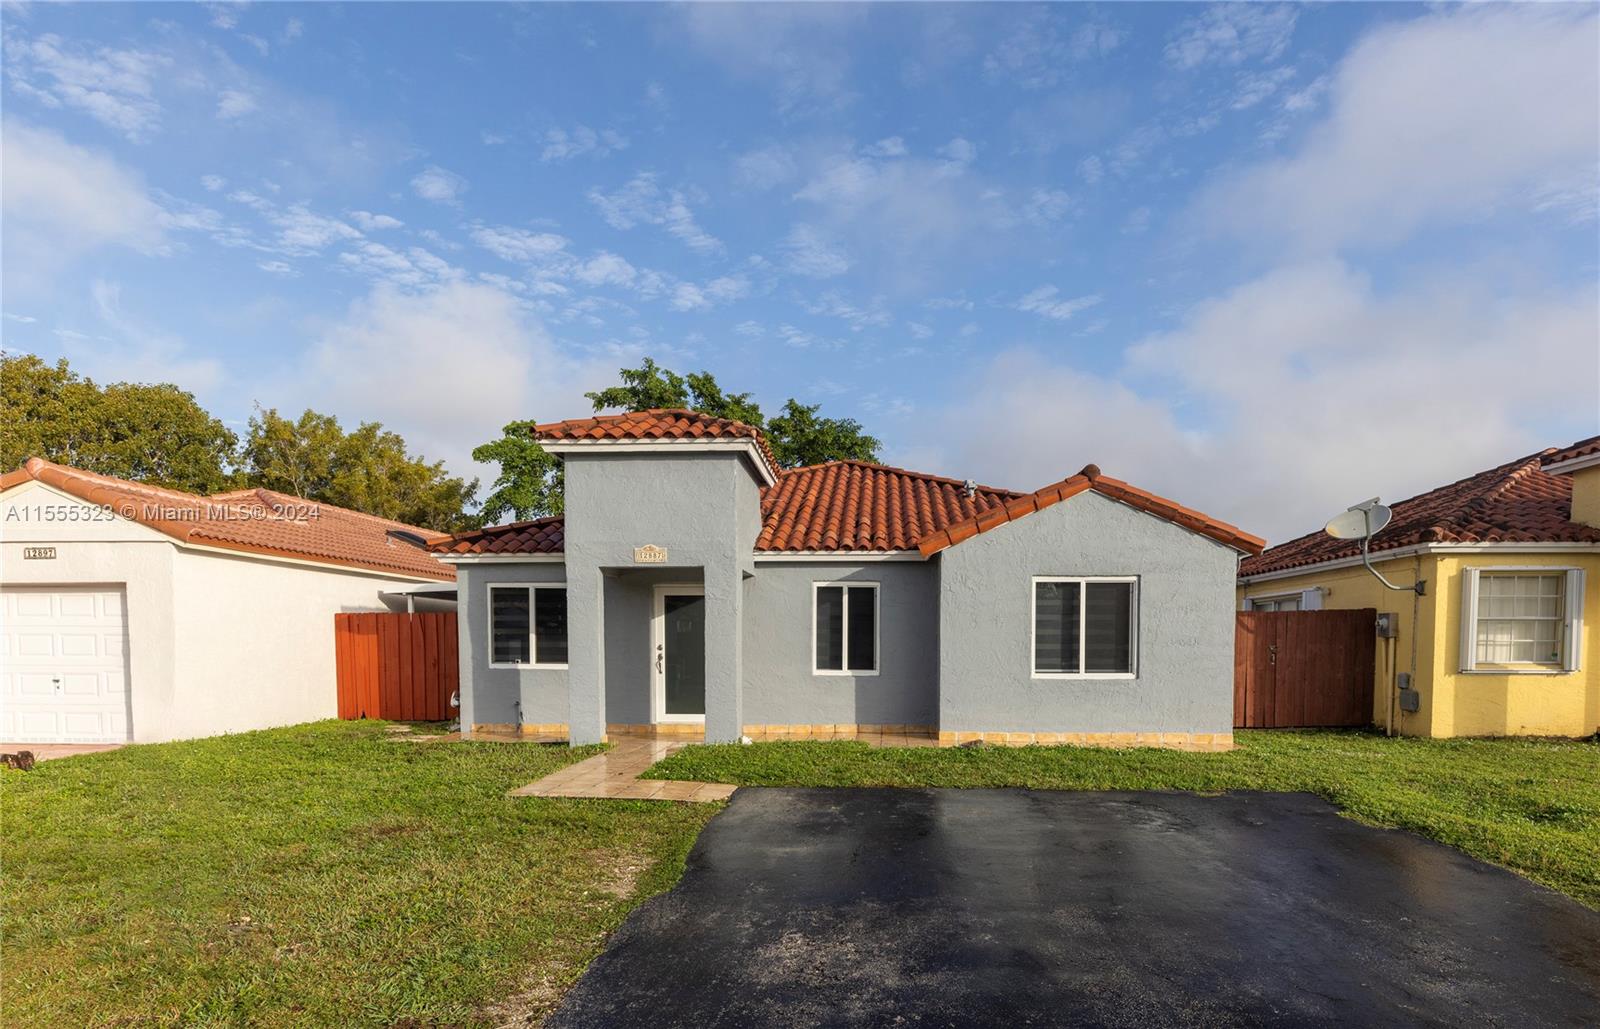 12887 SW 151st Ln, Miami, Florida 33186, 3 Bedrooms Bedrooms, ,2 BathroomsBathrooms,Residential,For Sale,12887 SW 151st Ln,A11555323